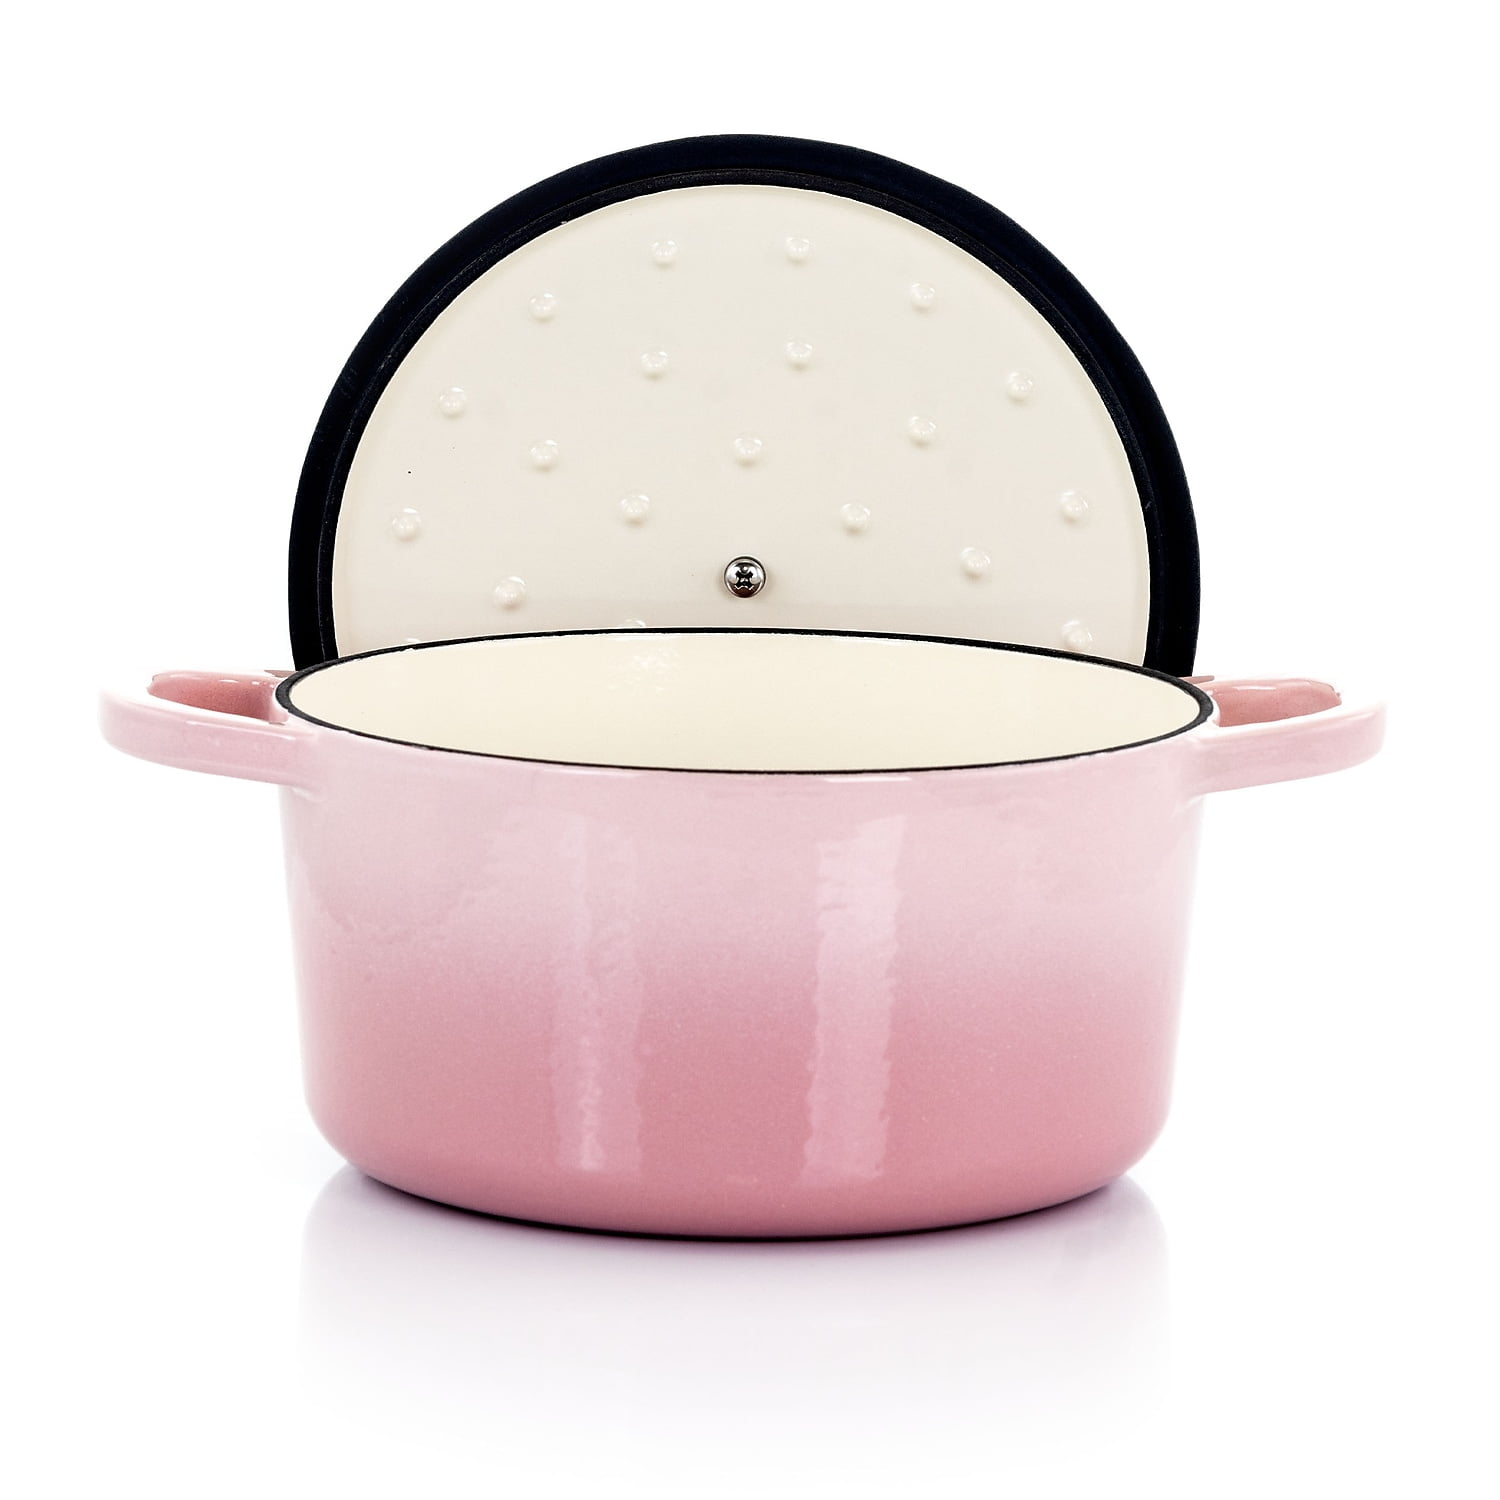 Dutch Oven Pink,Enameled Cast Iron Dutch Oven with Lid, 4 Quart Round  Nonstick Enamel Cookware Crock Pot,Dutch Oven with Dual Handle and Cover  Casserole Dish 8.66 Inch 